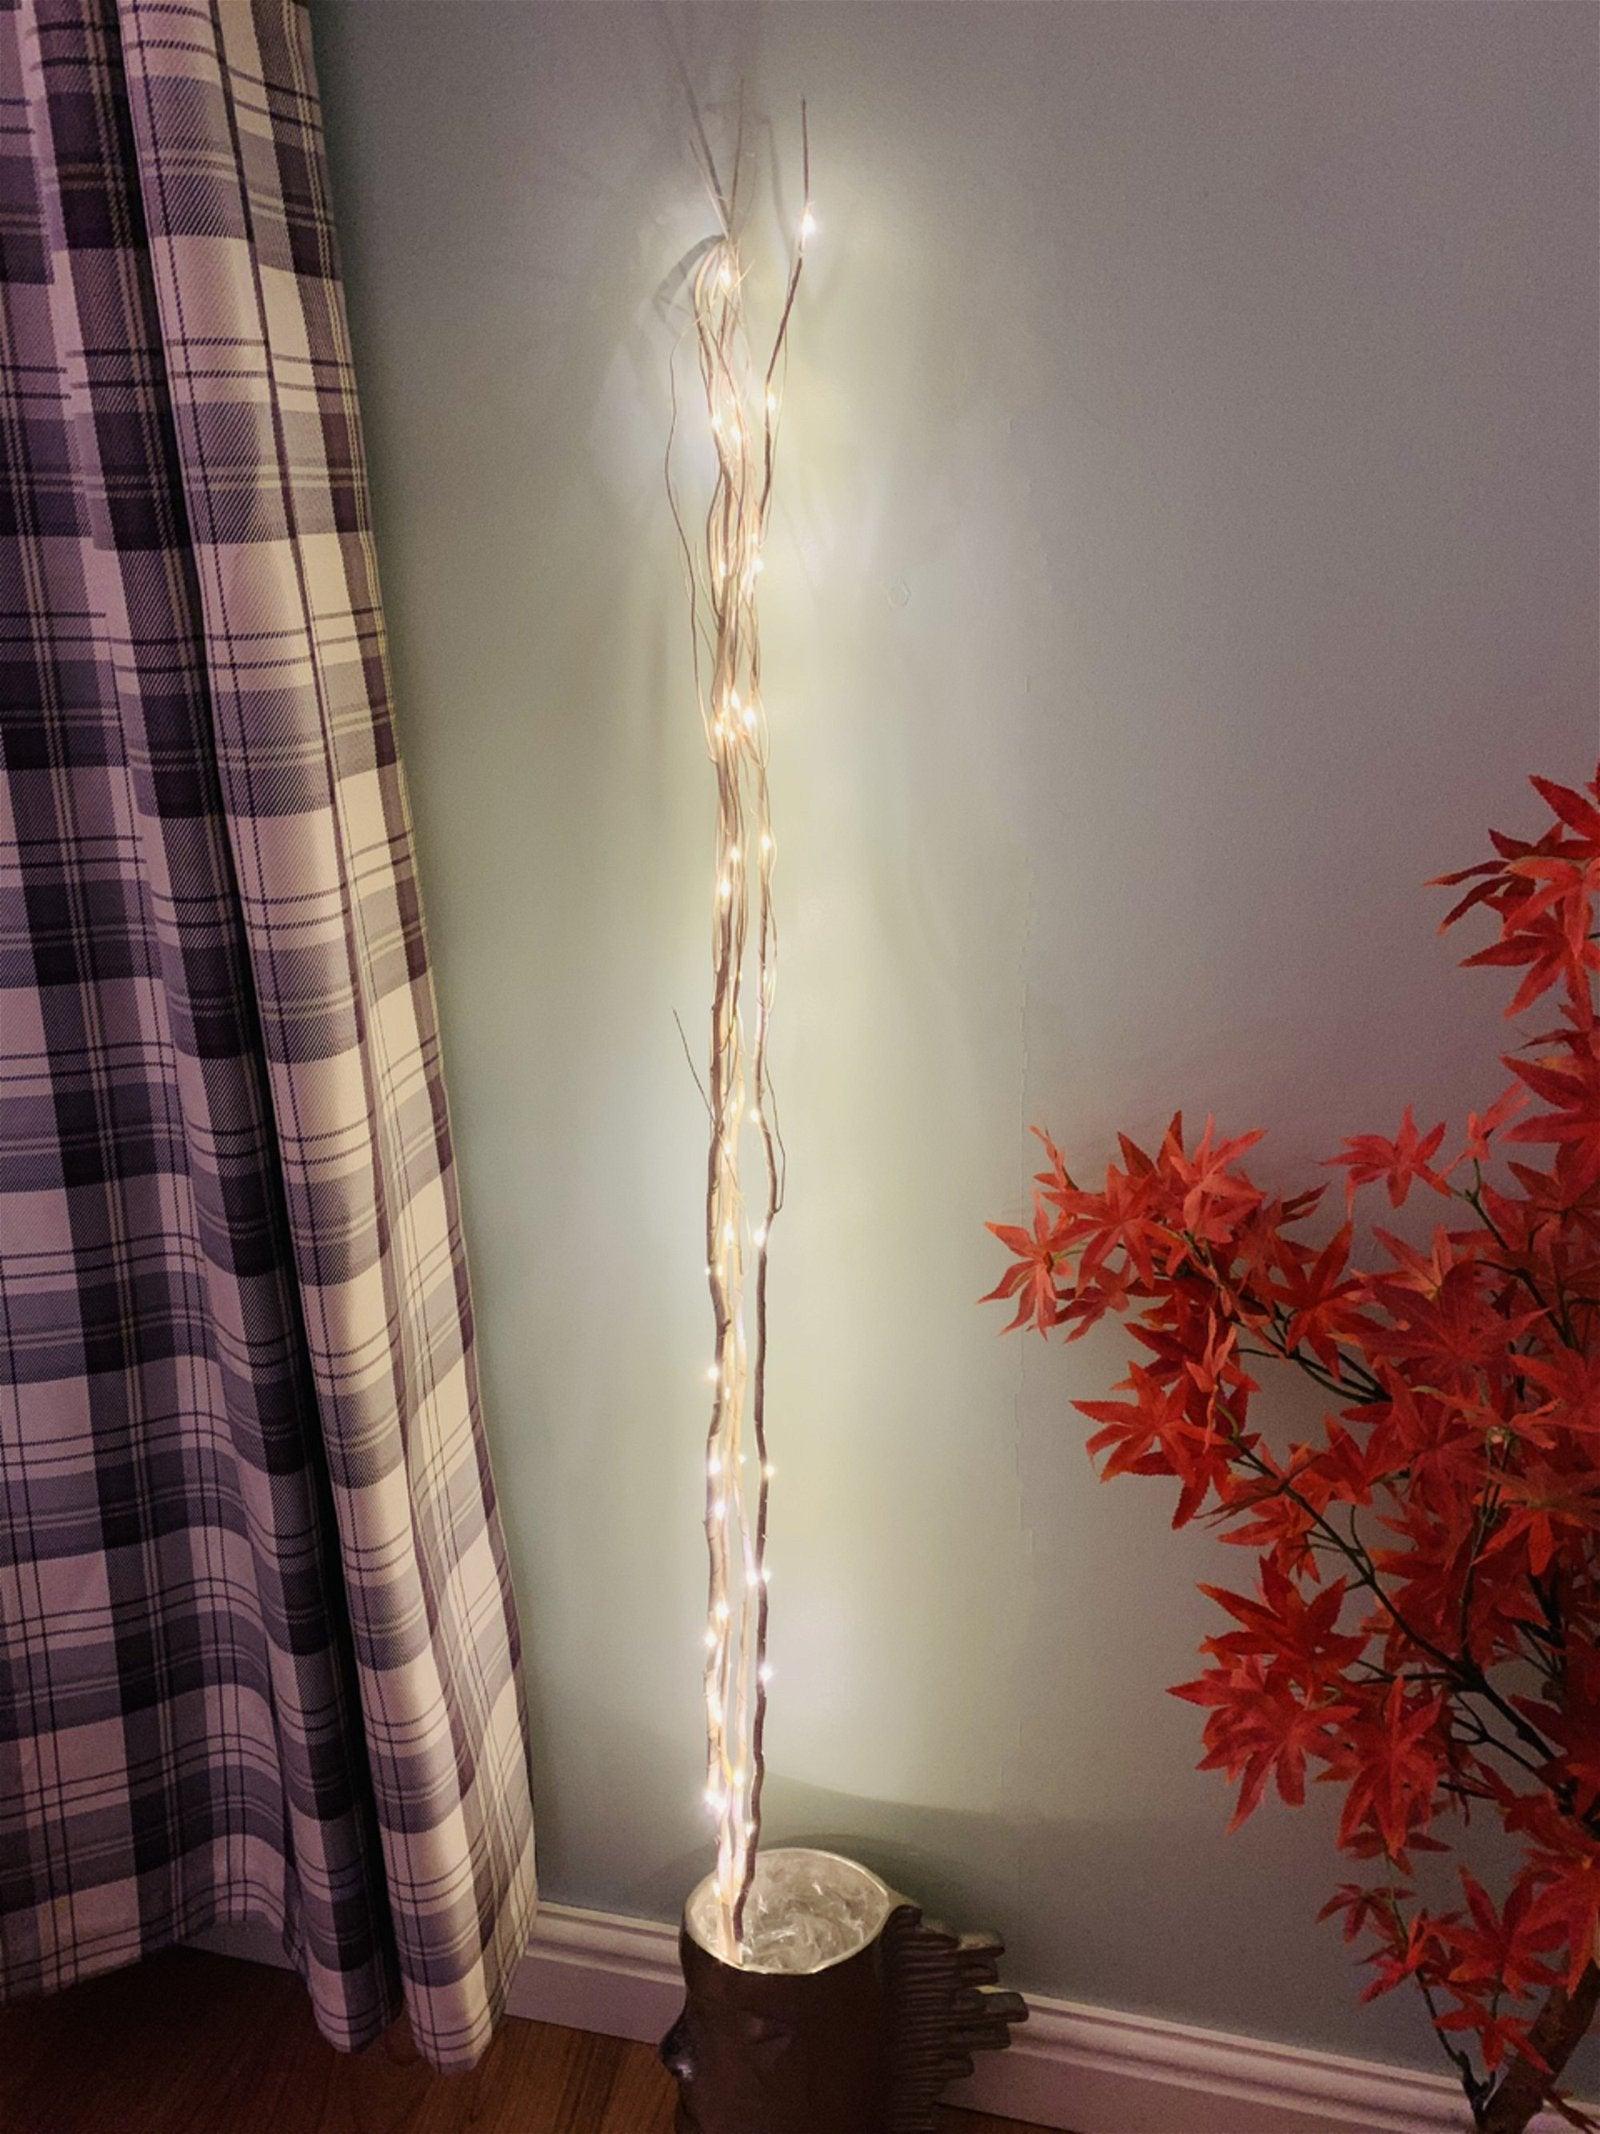 View LED Lights on 4 White Branches information